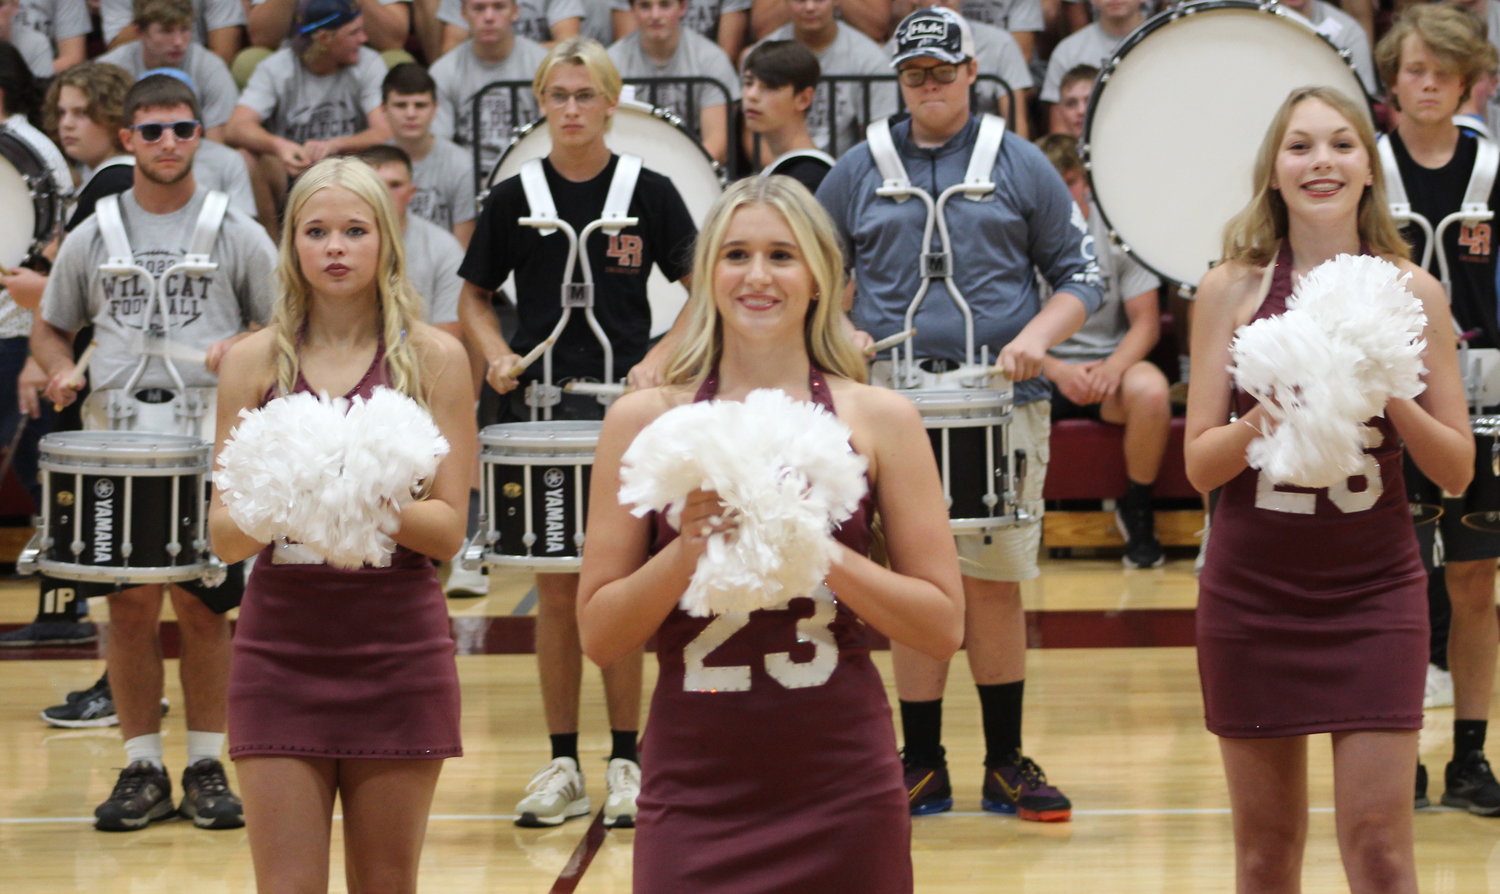 What better way to kick off a pep rally than with POMS! The PomCats of Logan-Rogersville starts the event with smiles and dancing!